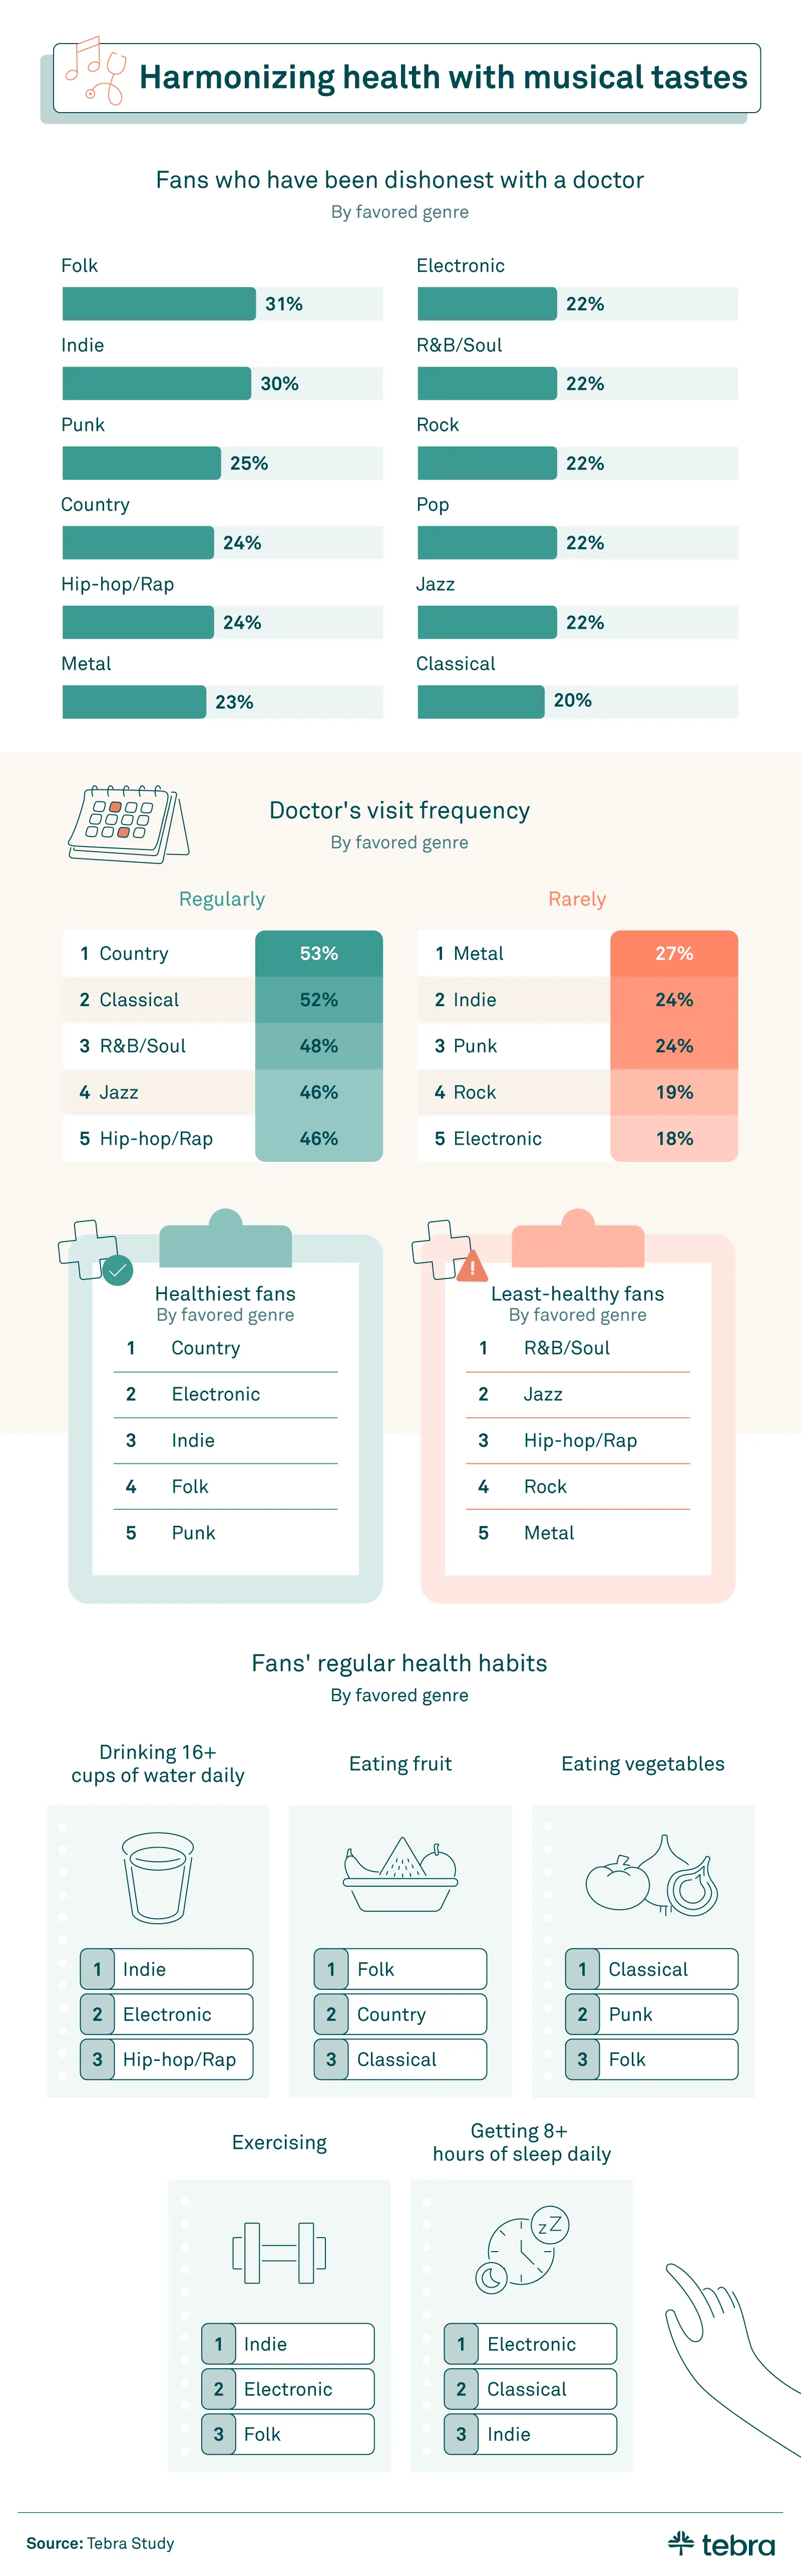 music and health habits among patients